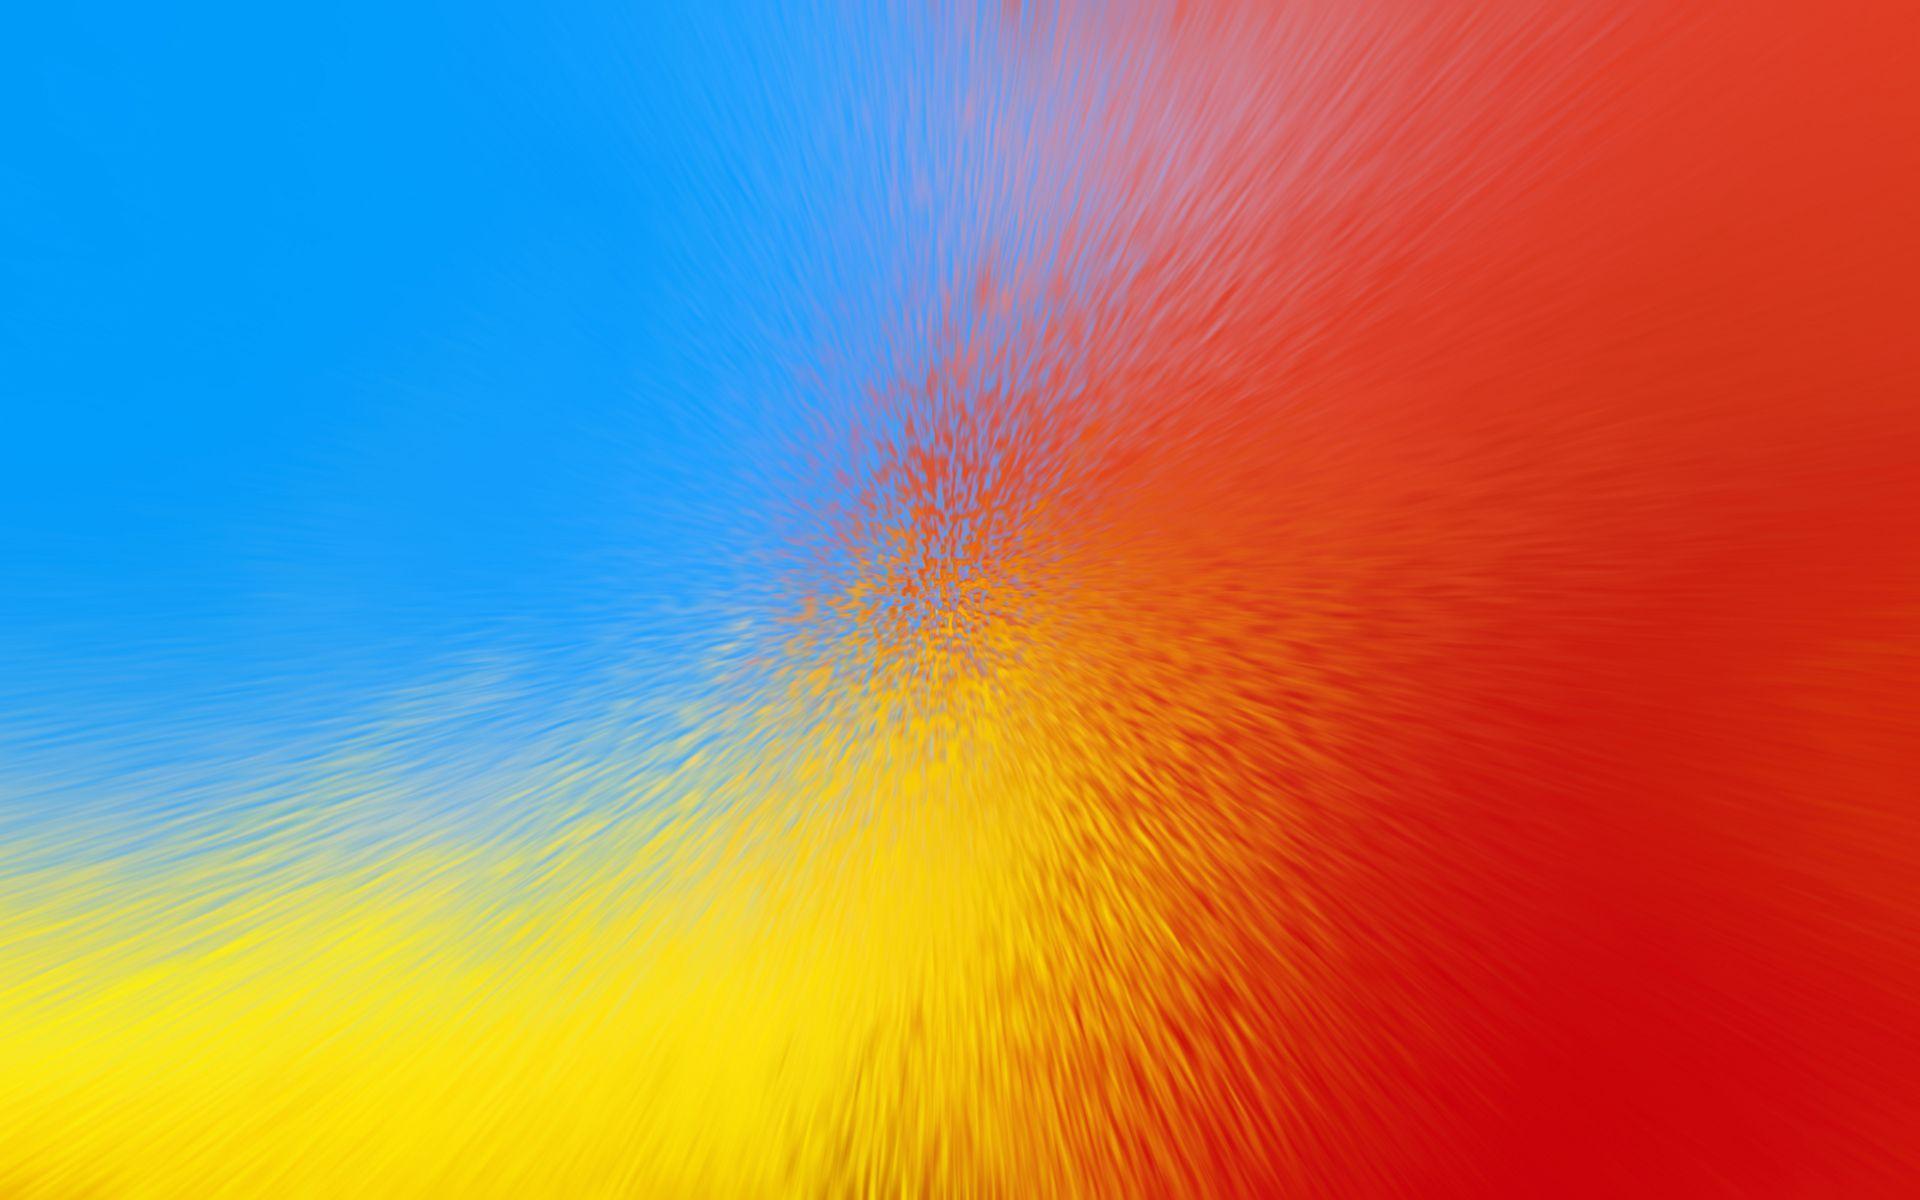 Full HD Wallpaper + Abstract, Blue, Red, Yellow